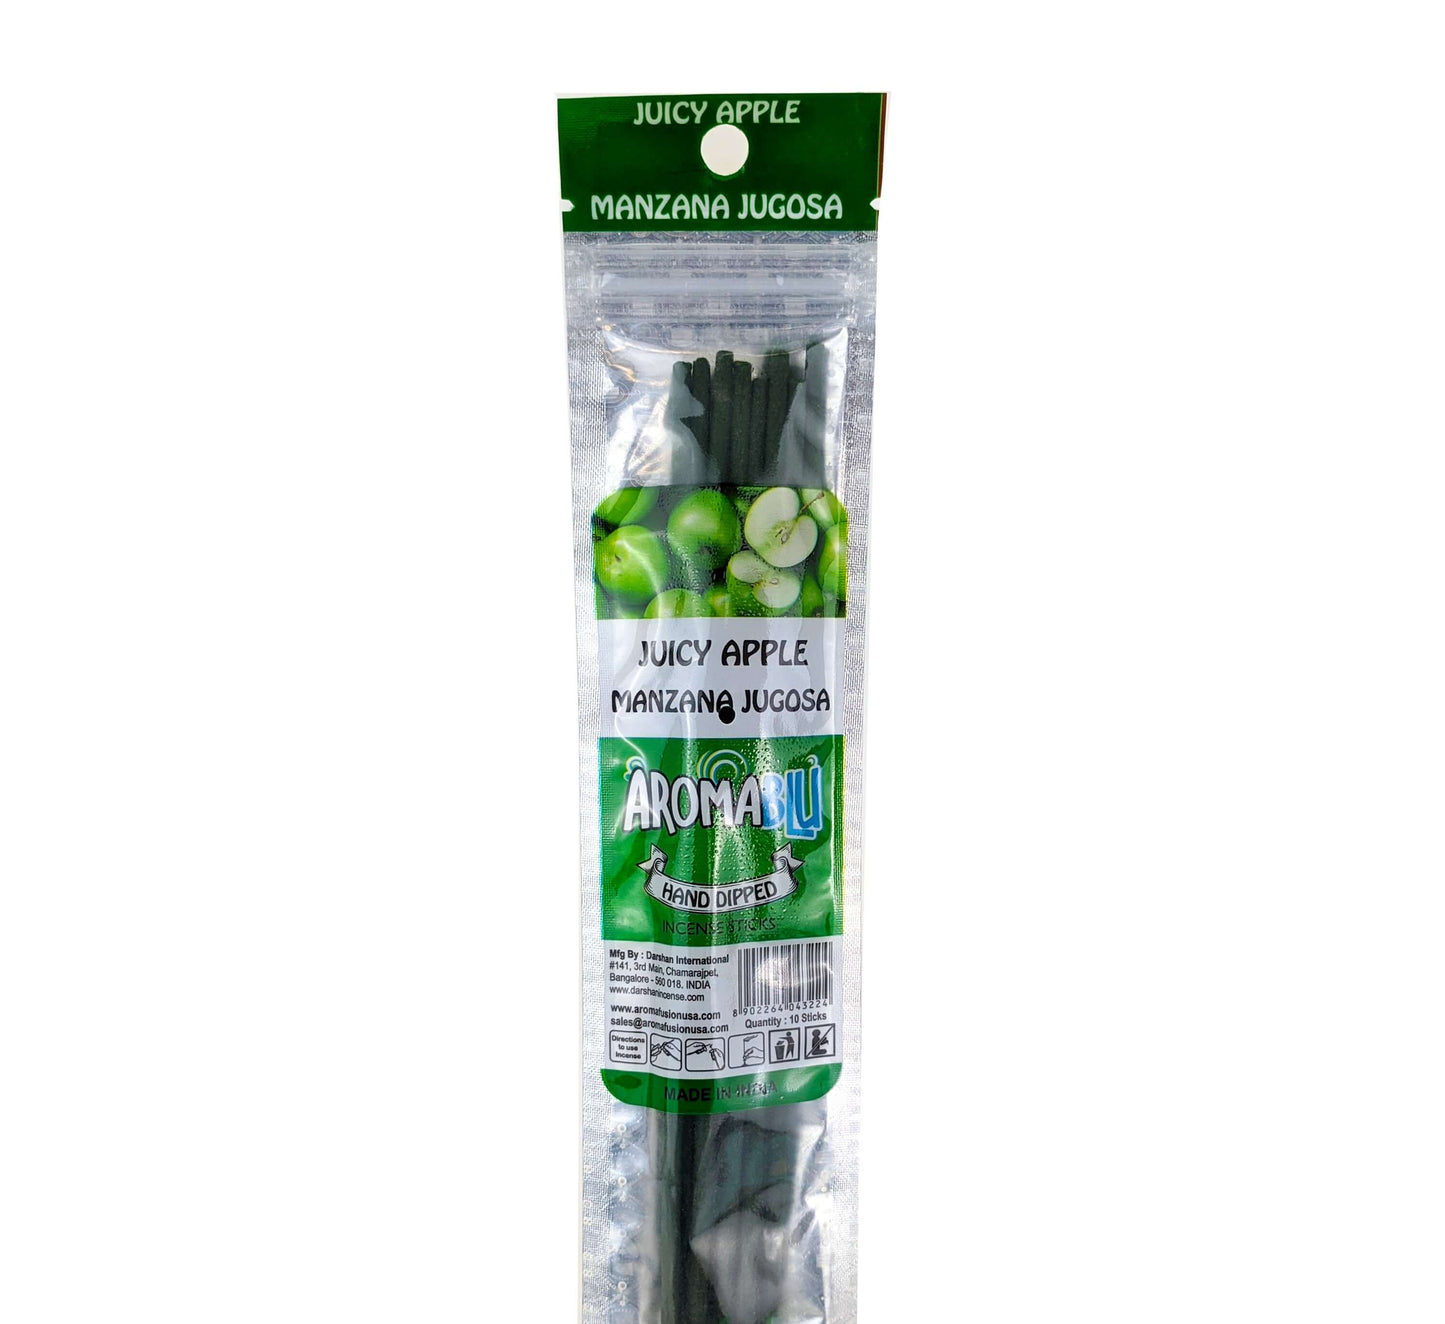 AromaBlu Hand Dipped 11" Incense Sticks, Juicy Apple Scent